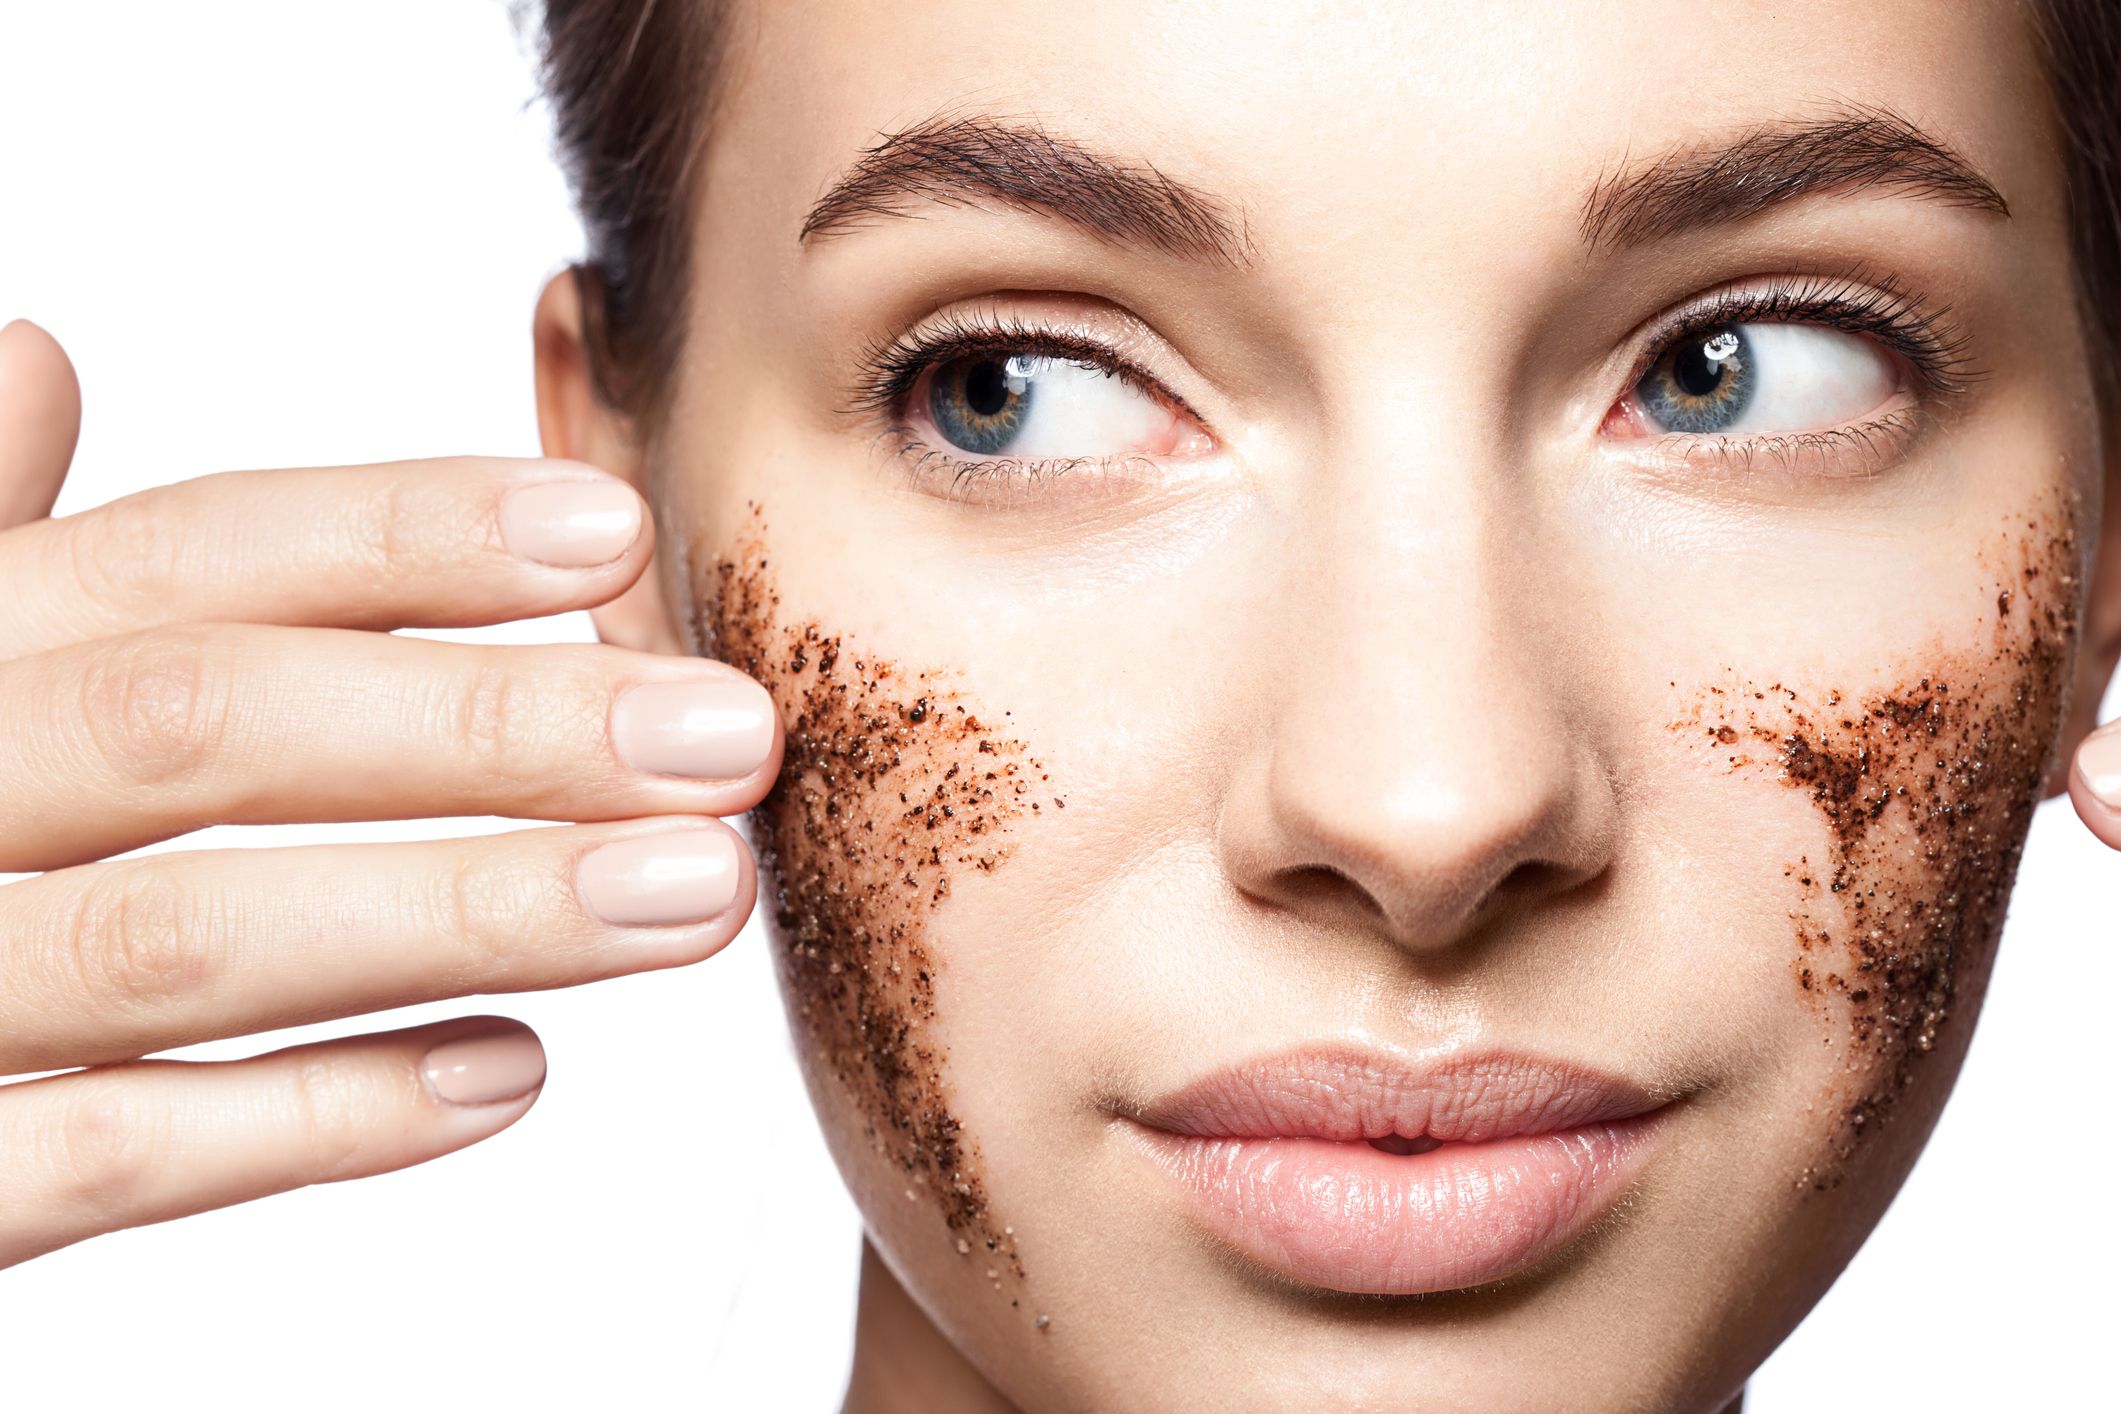 How To Exfoliate Face: A Dermatologist's Guide